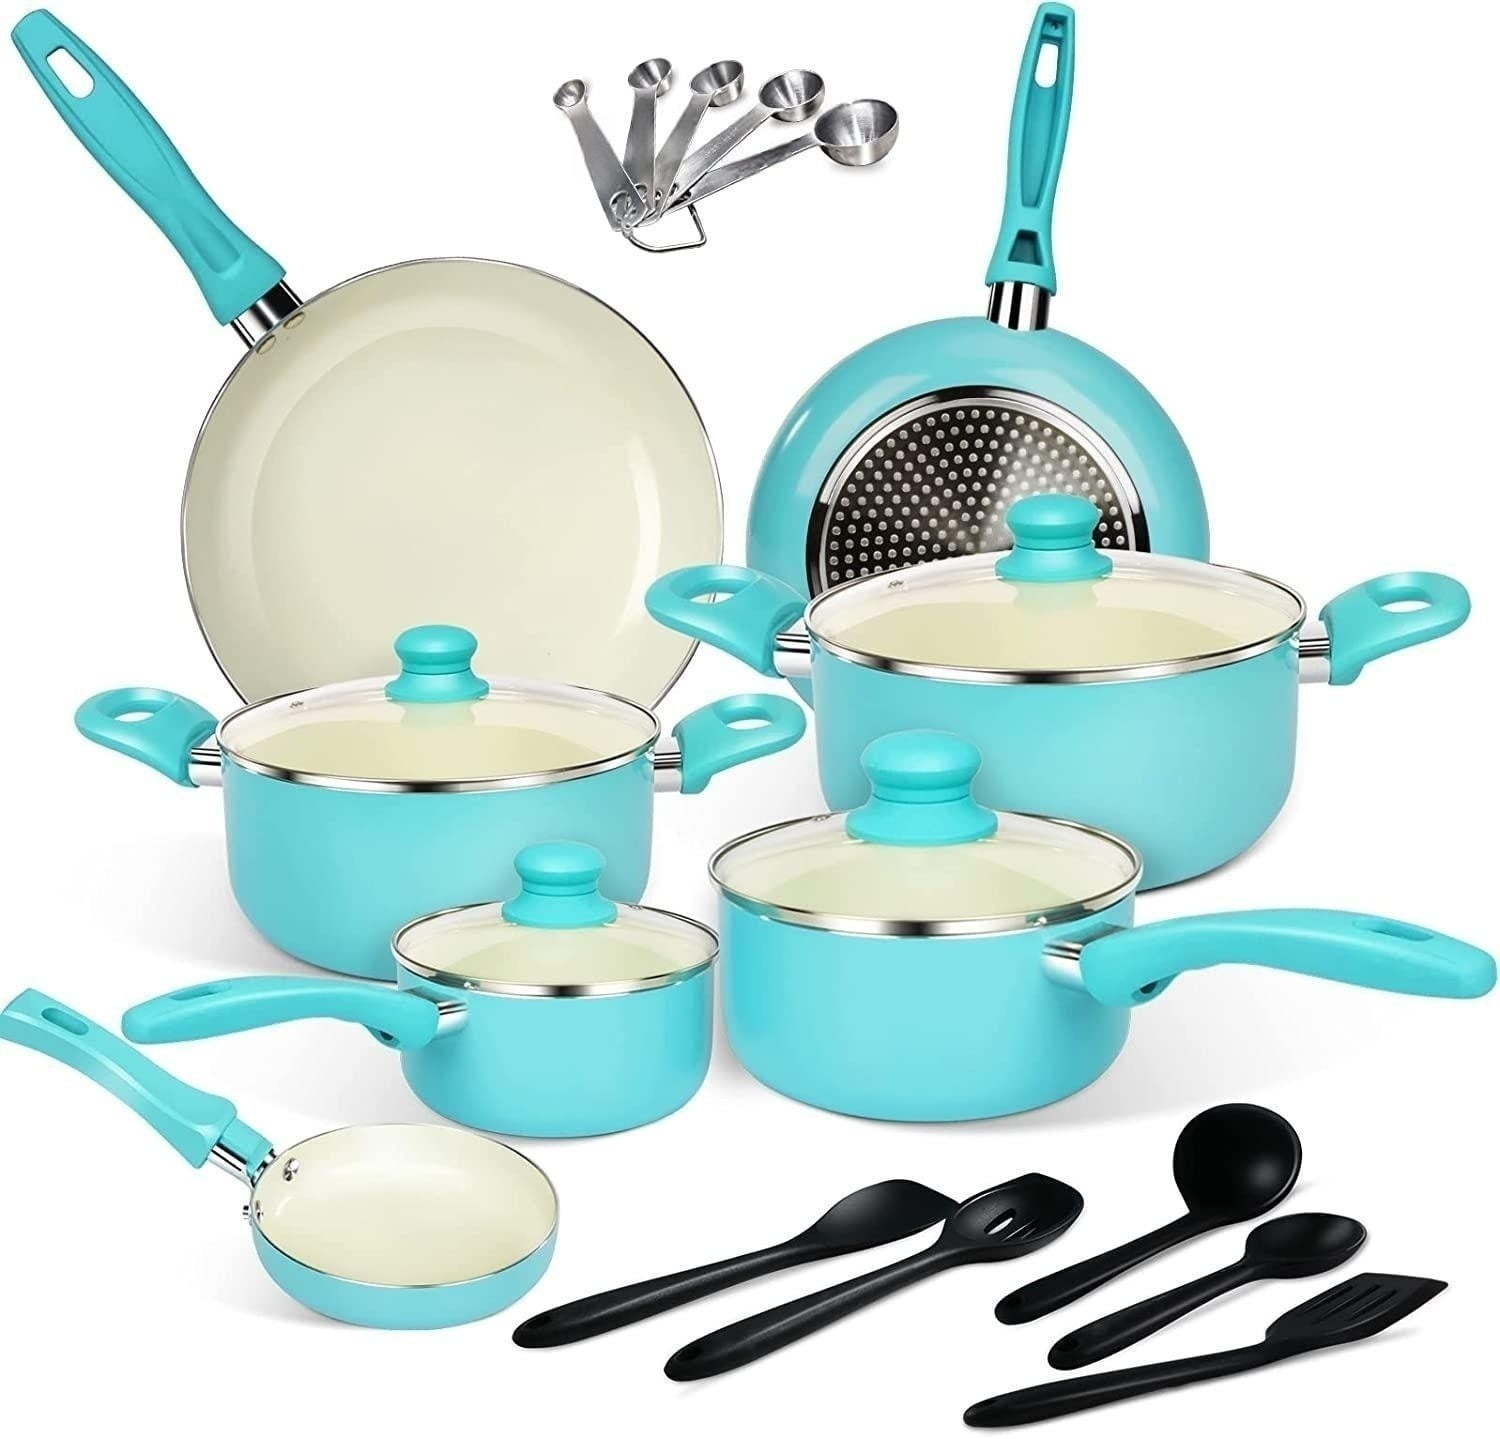 SENSARTE Nonstick Ceramic Cookware Set 13-Piece, Healthy Pots and Pans Set,  Non-toxic Kitchen Cooking Set with Stay-Cool Handles, Silicone Tools and